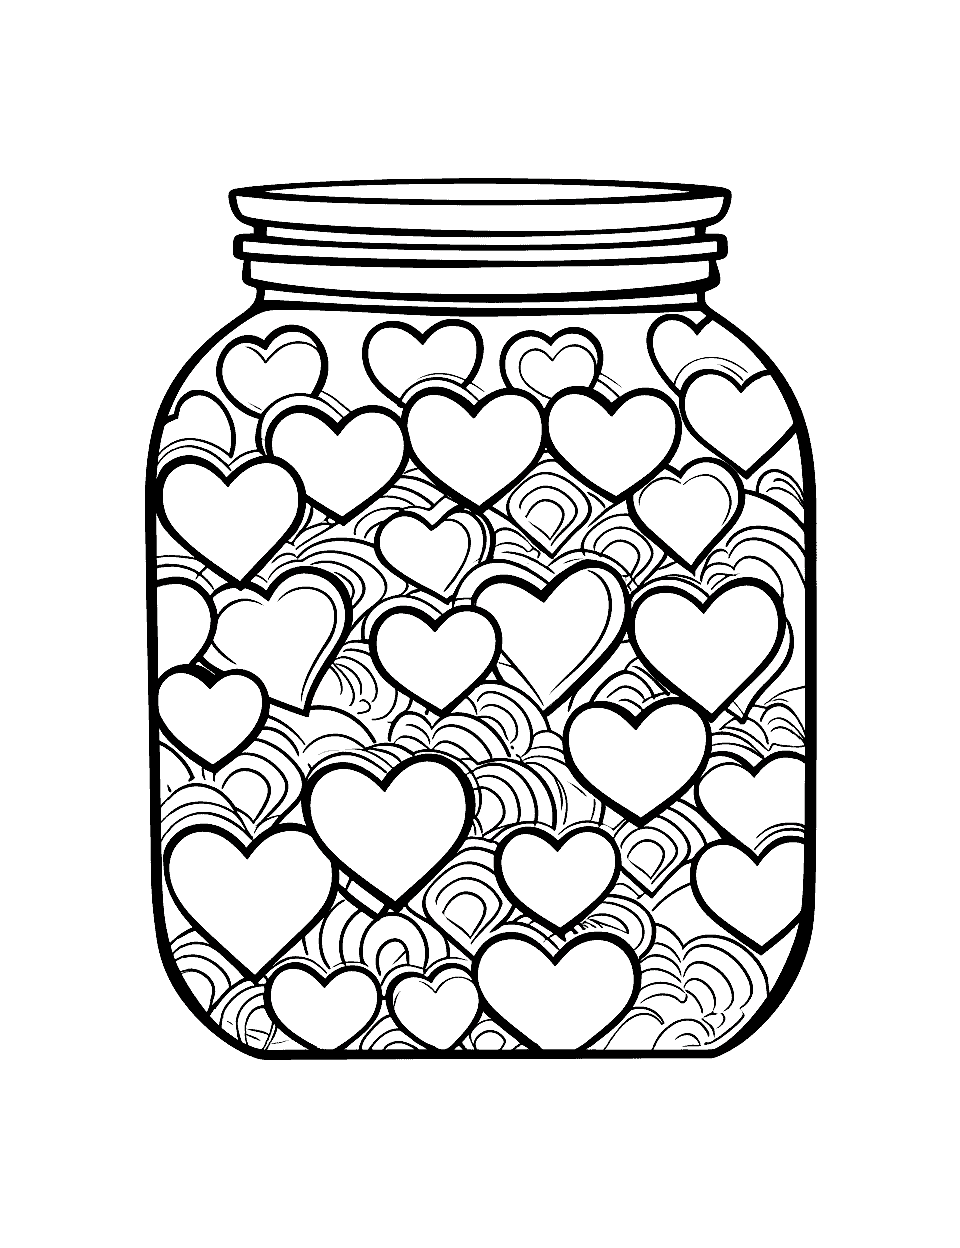 Hearts in a Jar Heart Coloring Page - A jar filled with small hearts of different sizes.